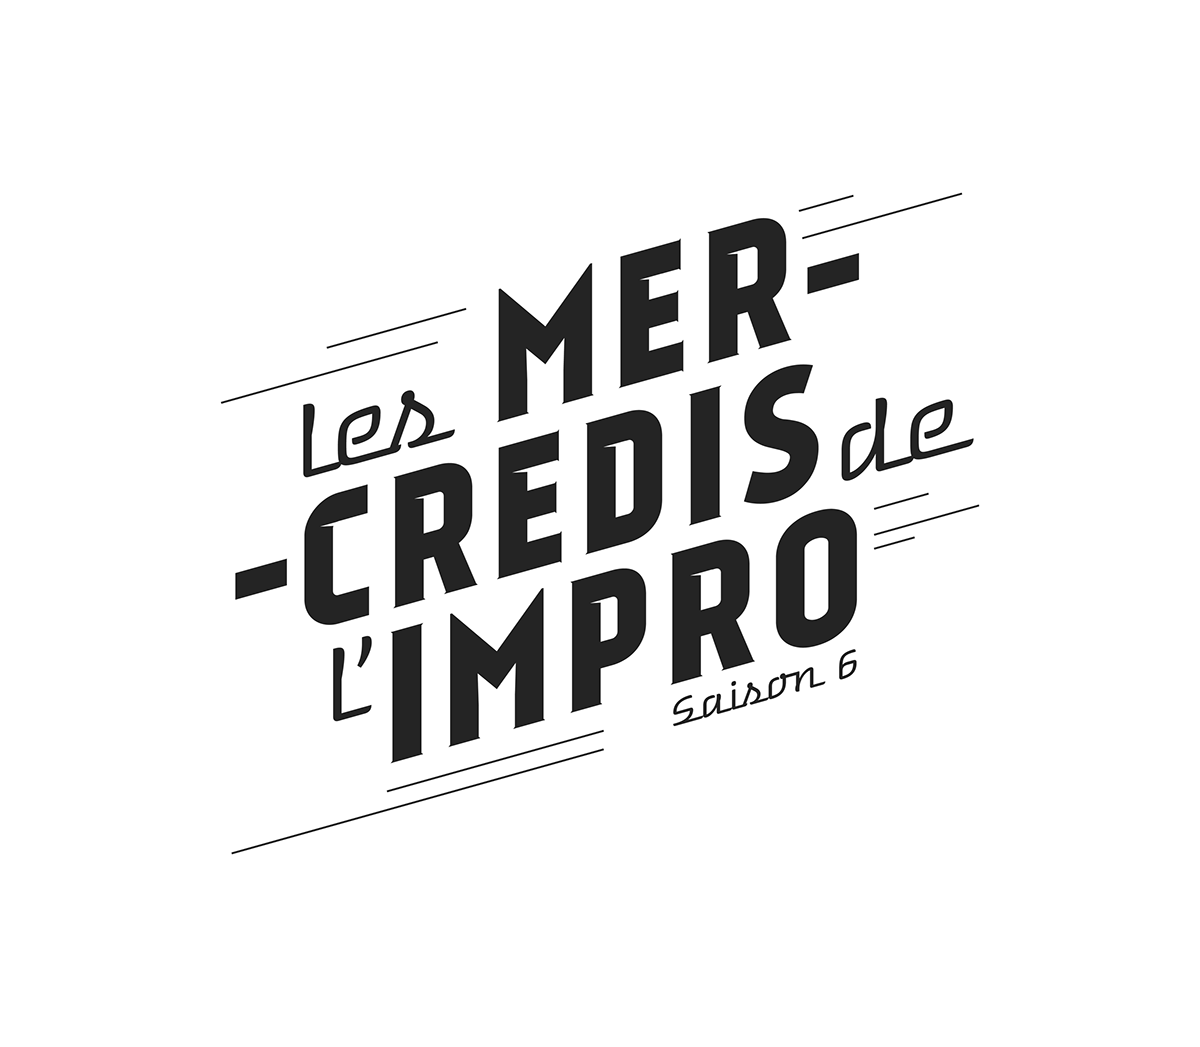 Improbales theater  improvisation compagny comedy 